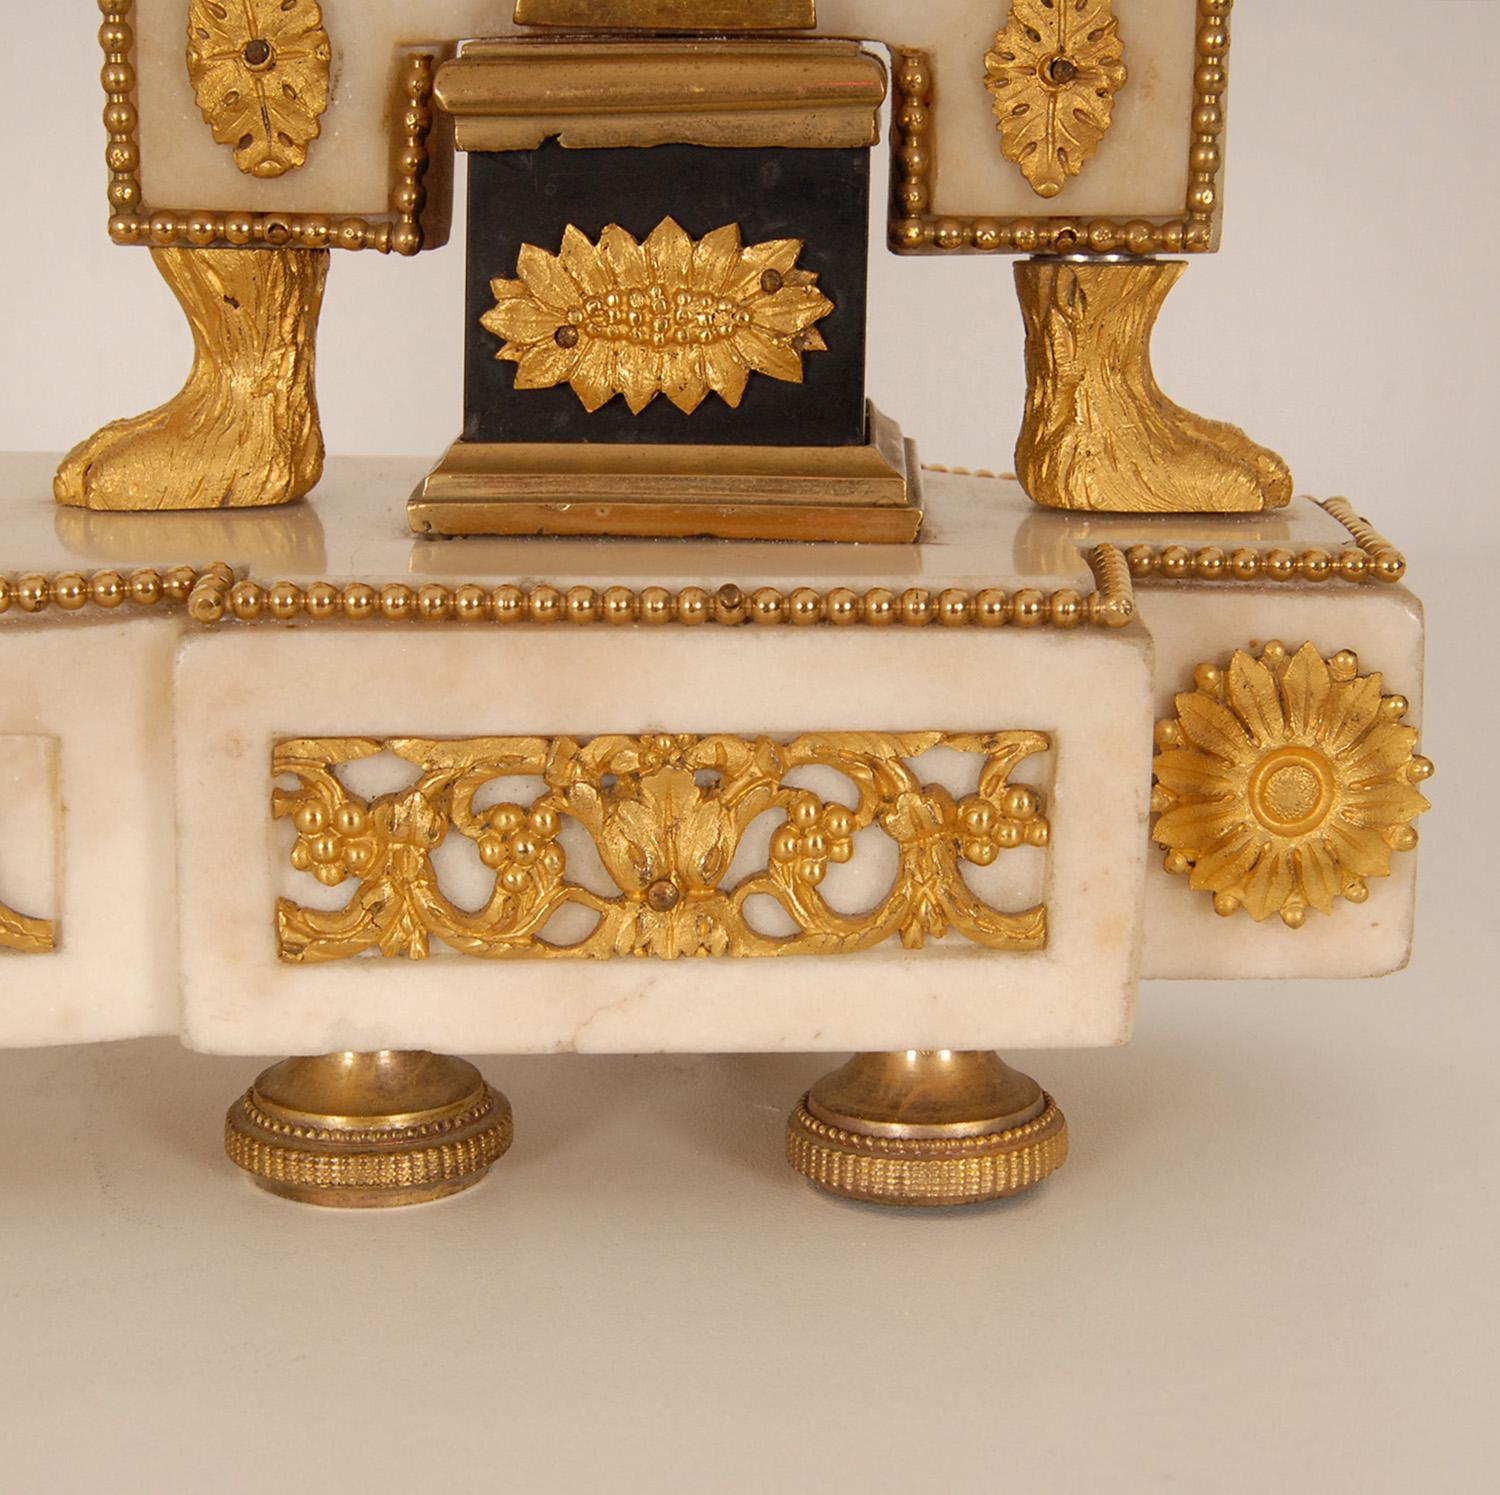 18th Century and Earlier 18th Century French Mantel Clock Pendulum White Marble Ormolu Gold Gilded Bronze